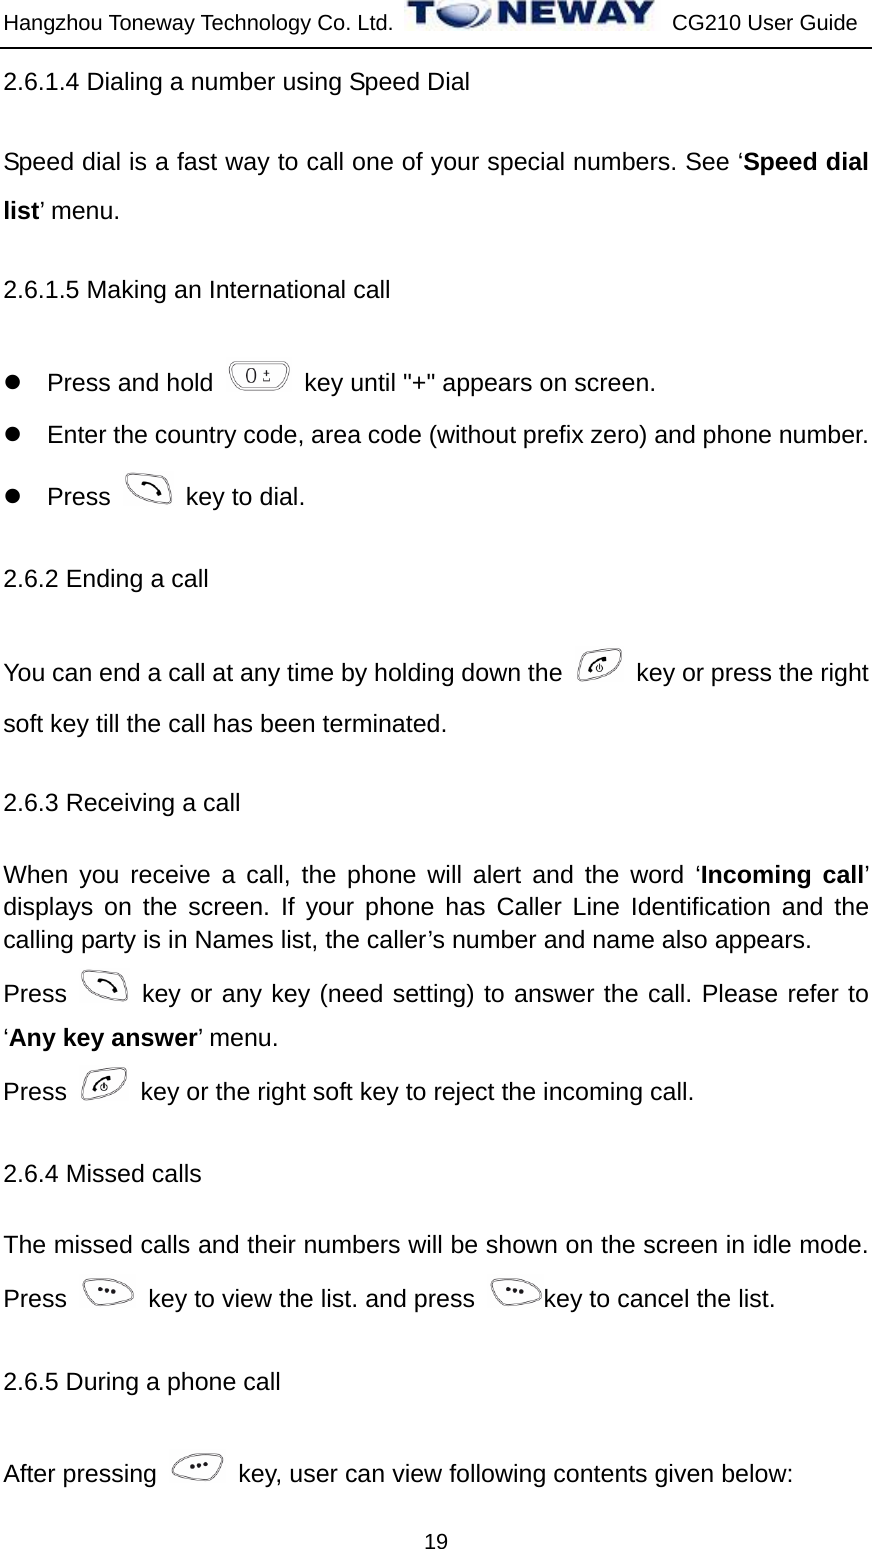 Hangzhou Toneway Technology Co. Ltd.    CG210 User Guide 19 2.6.1.4 Dialing a number using Speed Dial Speed dial is a fast way to call one of your special numbers. See ‘Speed dial list’ menu. 2.6.1.5 Making an International call z  Press and hold    key until &quot;+&quot; appears on screen. z  Enter the country code, area code (without prefix zero) and phone number. z Press    key to dial. 2.6.2 Ending a call You can end a call at any time by holding down the    key or press the right soft key till the call has been terminated. 2.6.3 Receiving a call   When you receive a call, the phone will alert and the word ‘Incoming call’ displays on the screen. If your phone has Caller Line Identification and the calling party is in Names list, the caller’s number and name also appears. Press   key or any key (need setting) to answer the call. Please refer to ‘Any key answer’ menu. Press    key or the right soft key to reject the incoming call. 2.6.4 Missed calls The missed calls and their numbers will be shown on the screen in idle mode. Press    key to view the list. and press  key to cancel the list.   2.6.5 During a phone call After pressing    key, user can view following contents given below: 